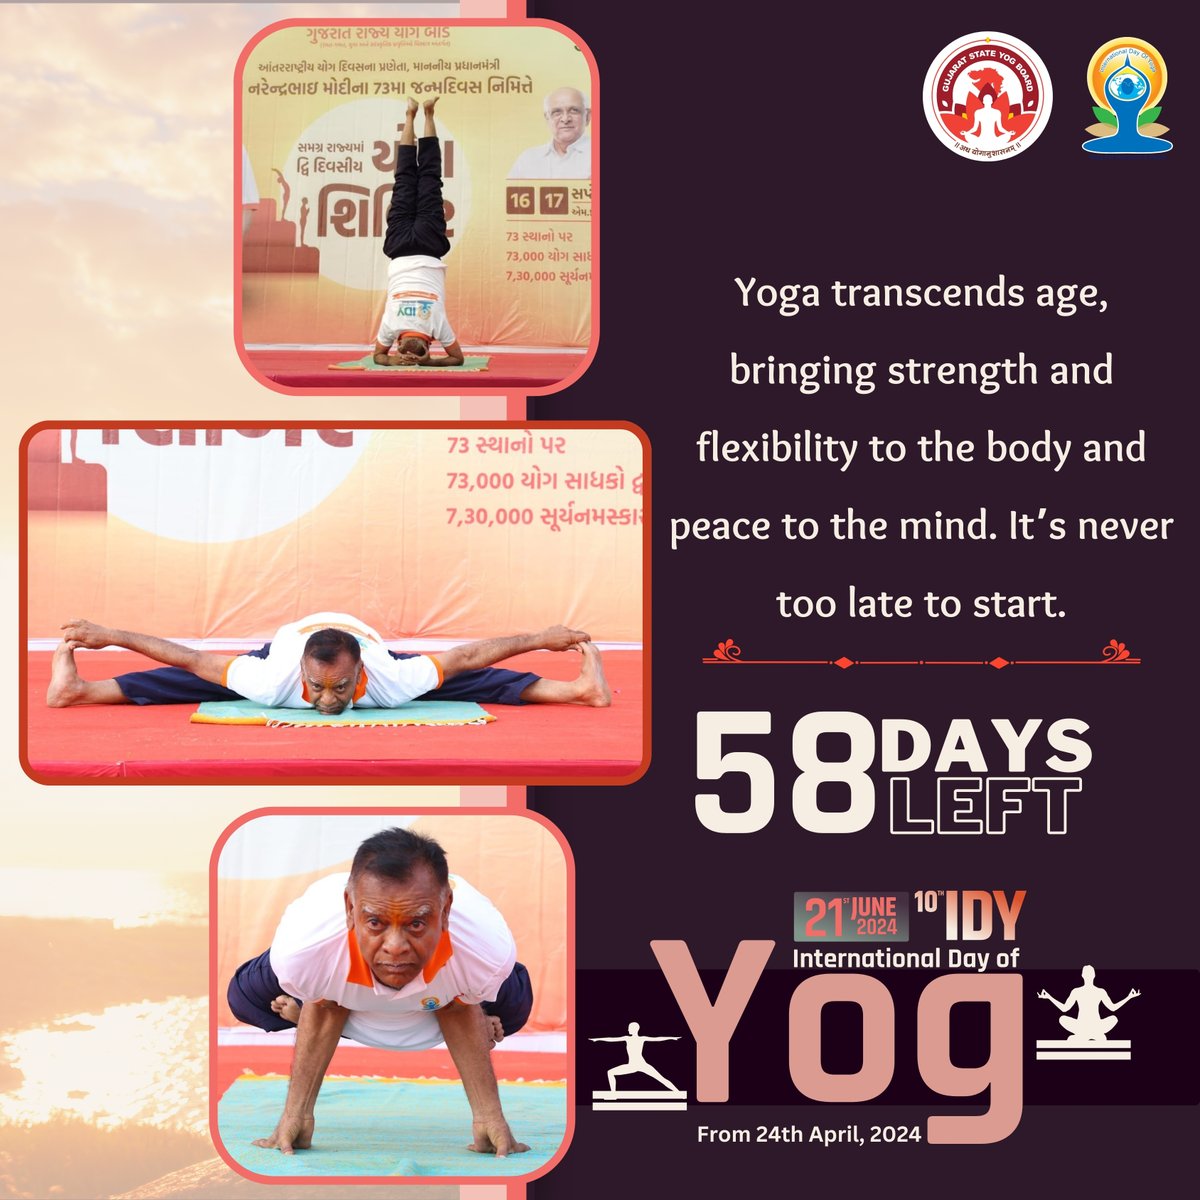 Yoga transcends age, bringing strength and flexibility to the body and peace to the mind. It’s never too late to start.

58 Days left to International Day of Yoga 2024

#GujaratStateYogBoard #YogmayGujarat #yogkaamrutkal #IDY2024